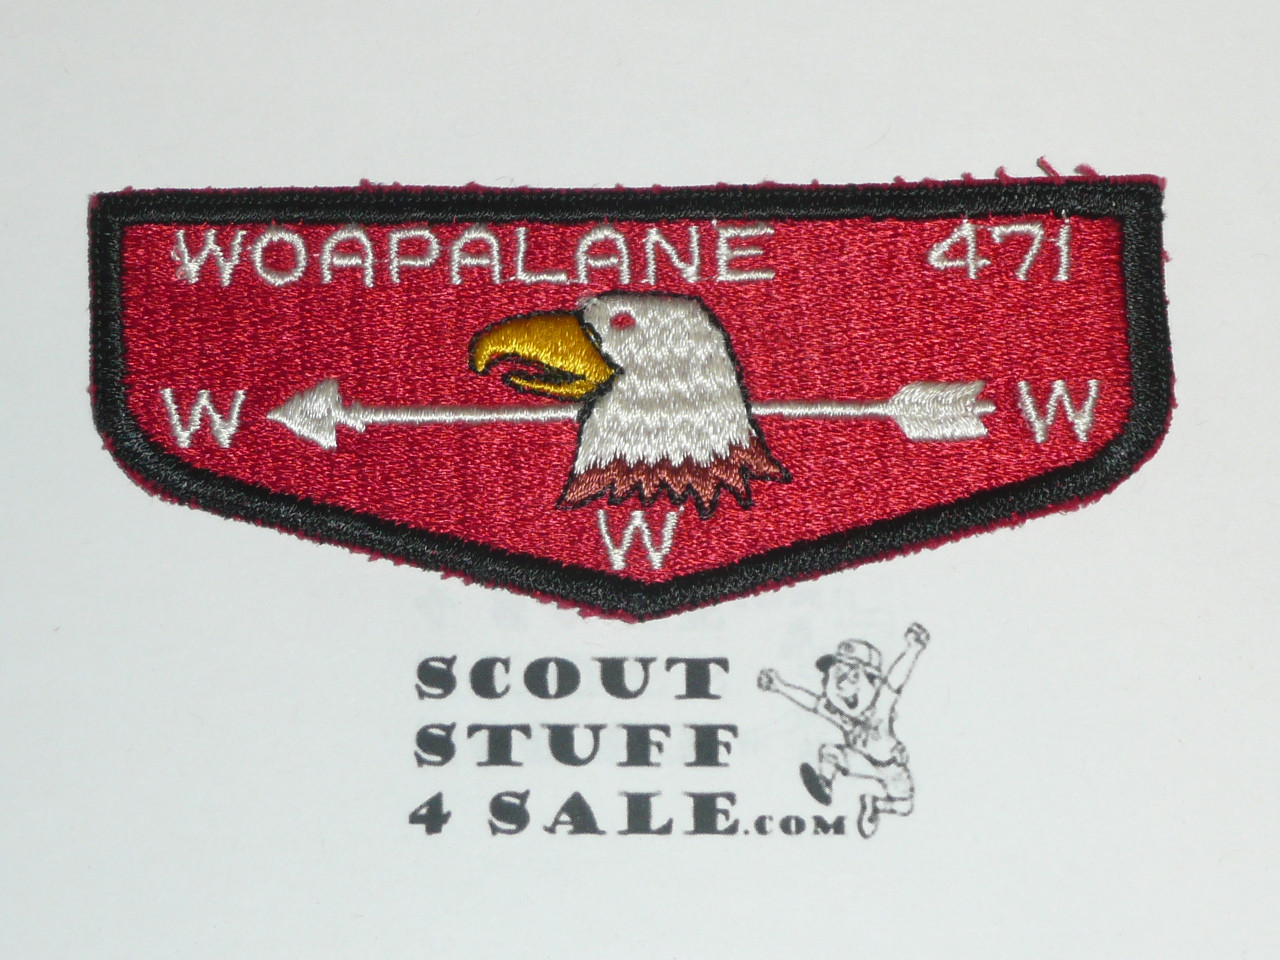 Order of the Arrow Lodge #471 Woapalane s1 First Flap Patch